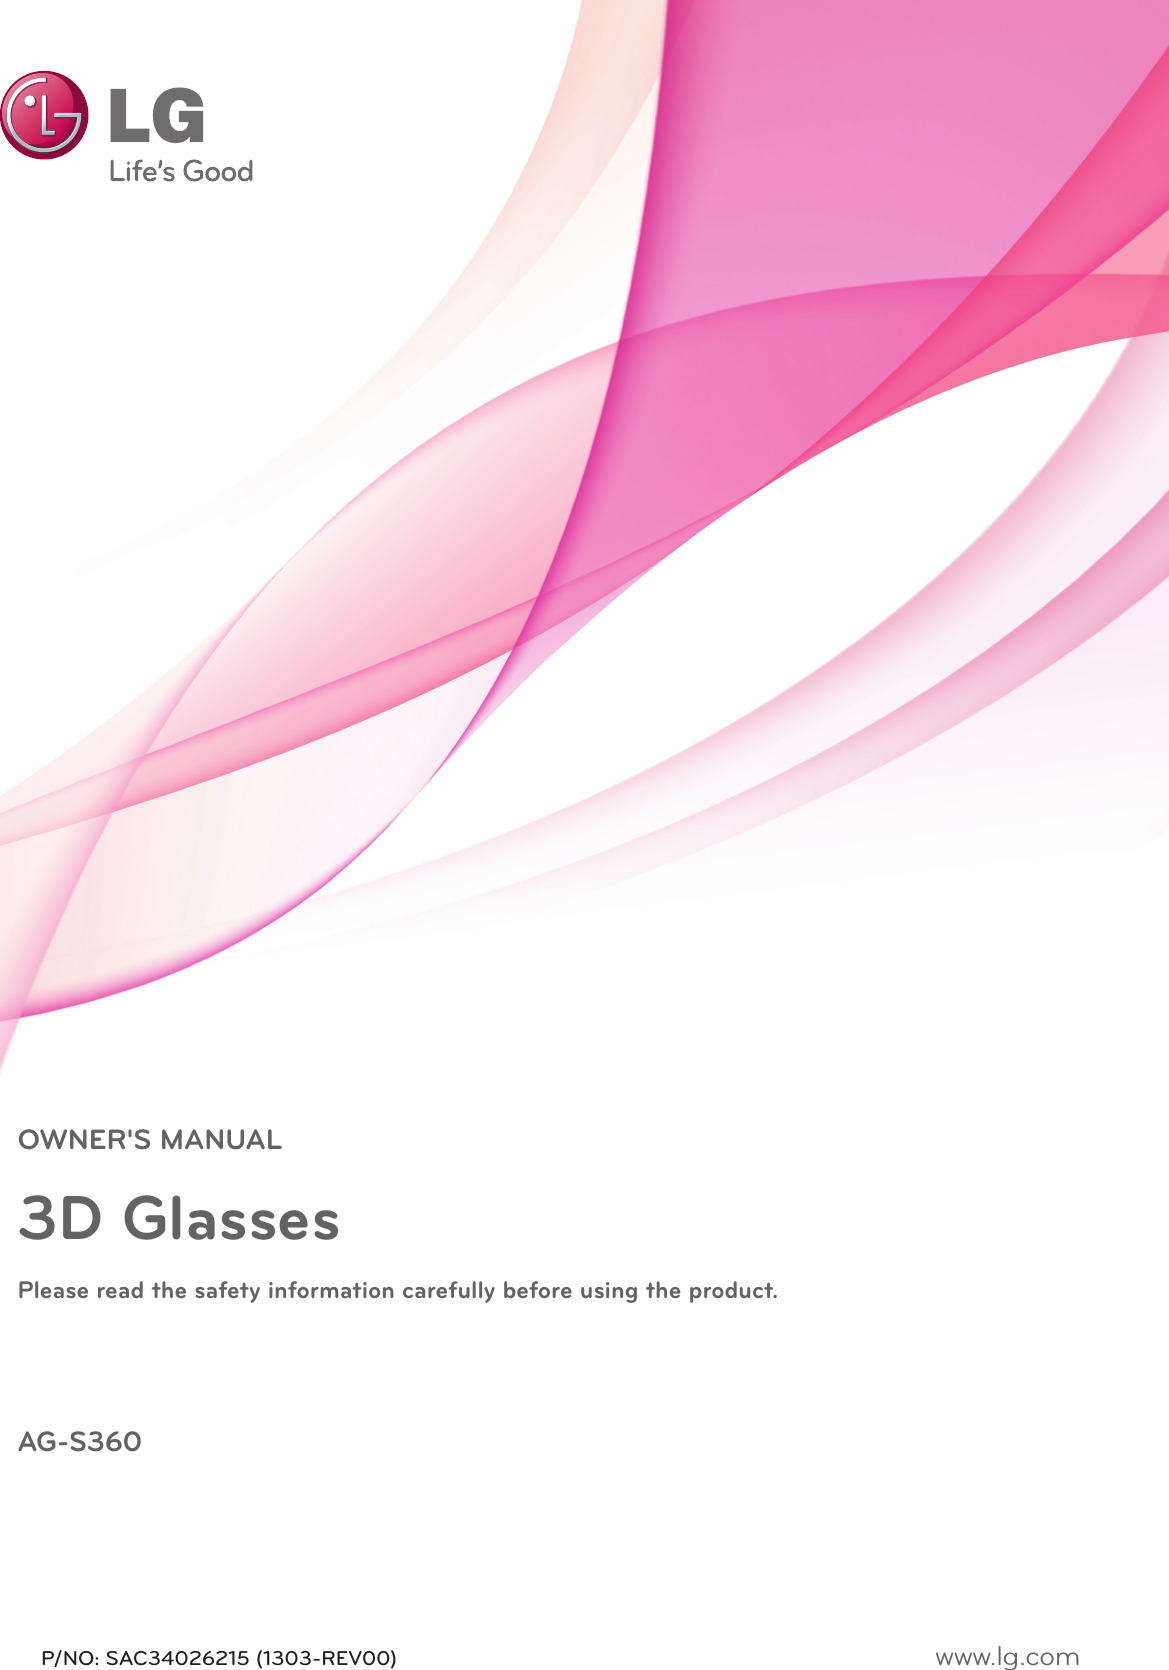 www.lg.comOWNER&apos;S MANUAL3D GlassesPlease read the safety information carefully before using the product.AG-S360P/NO: SAC34026215 (1303-REV00)